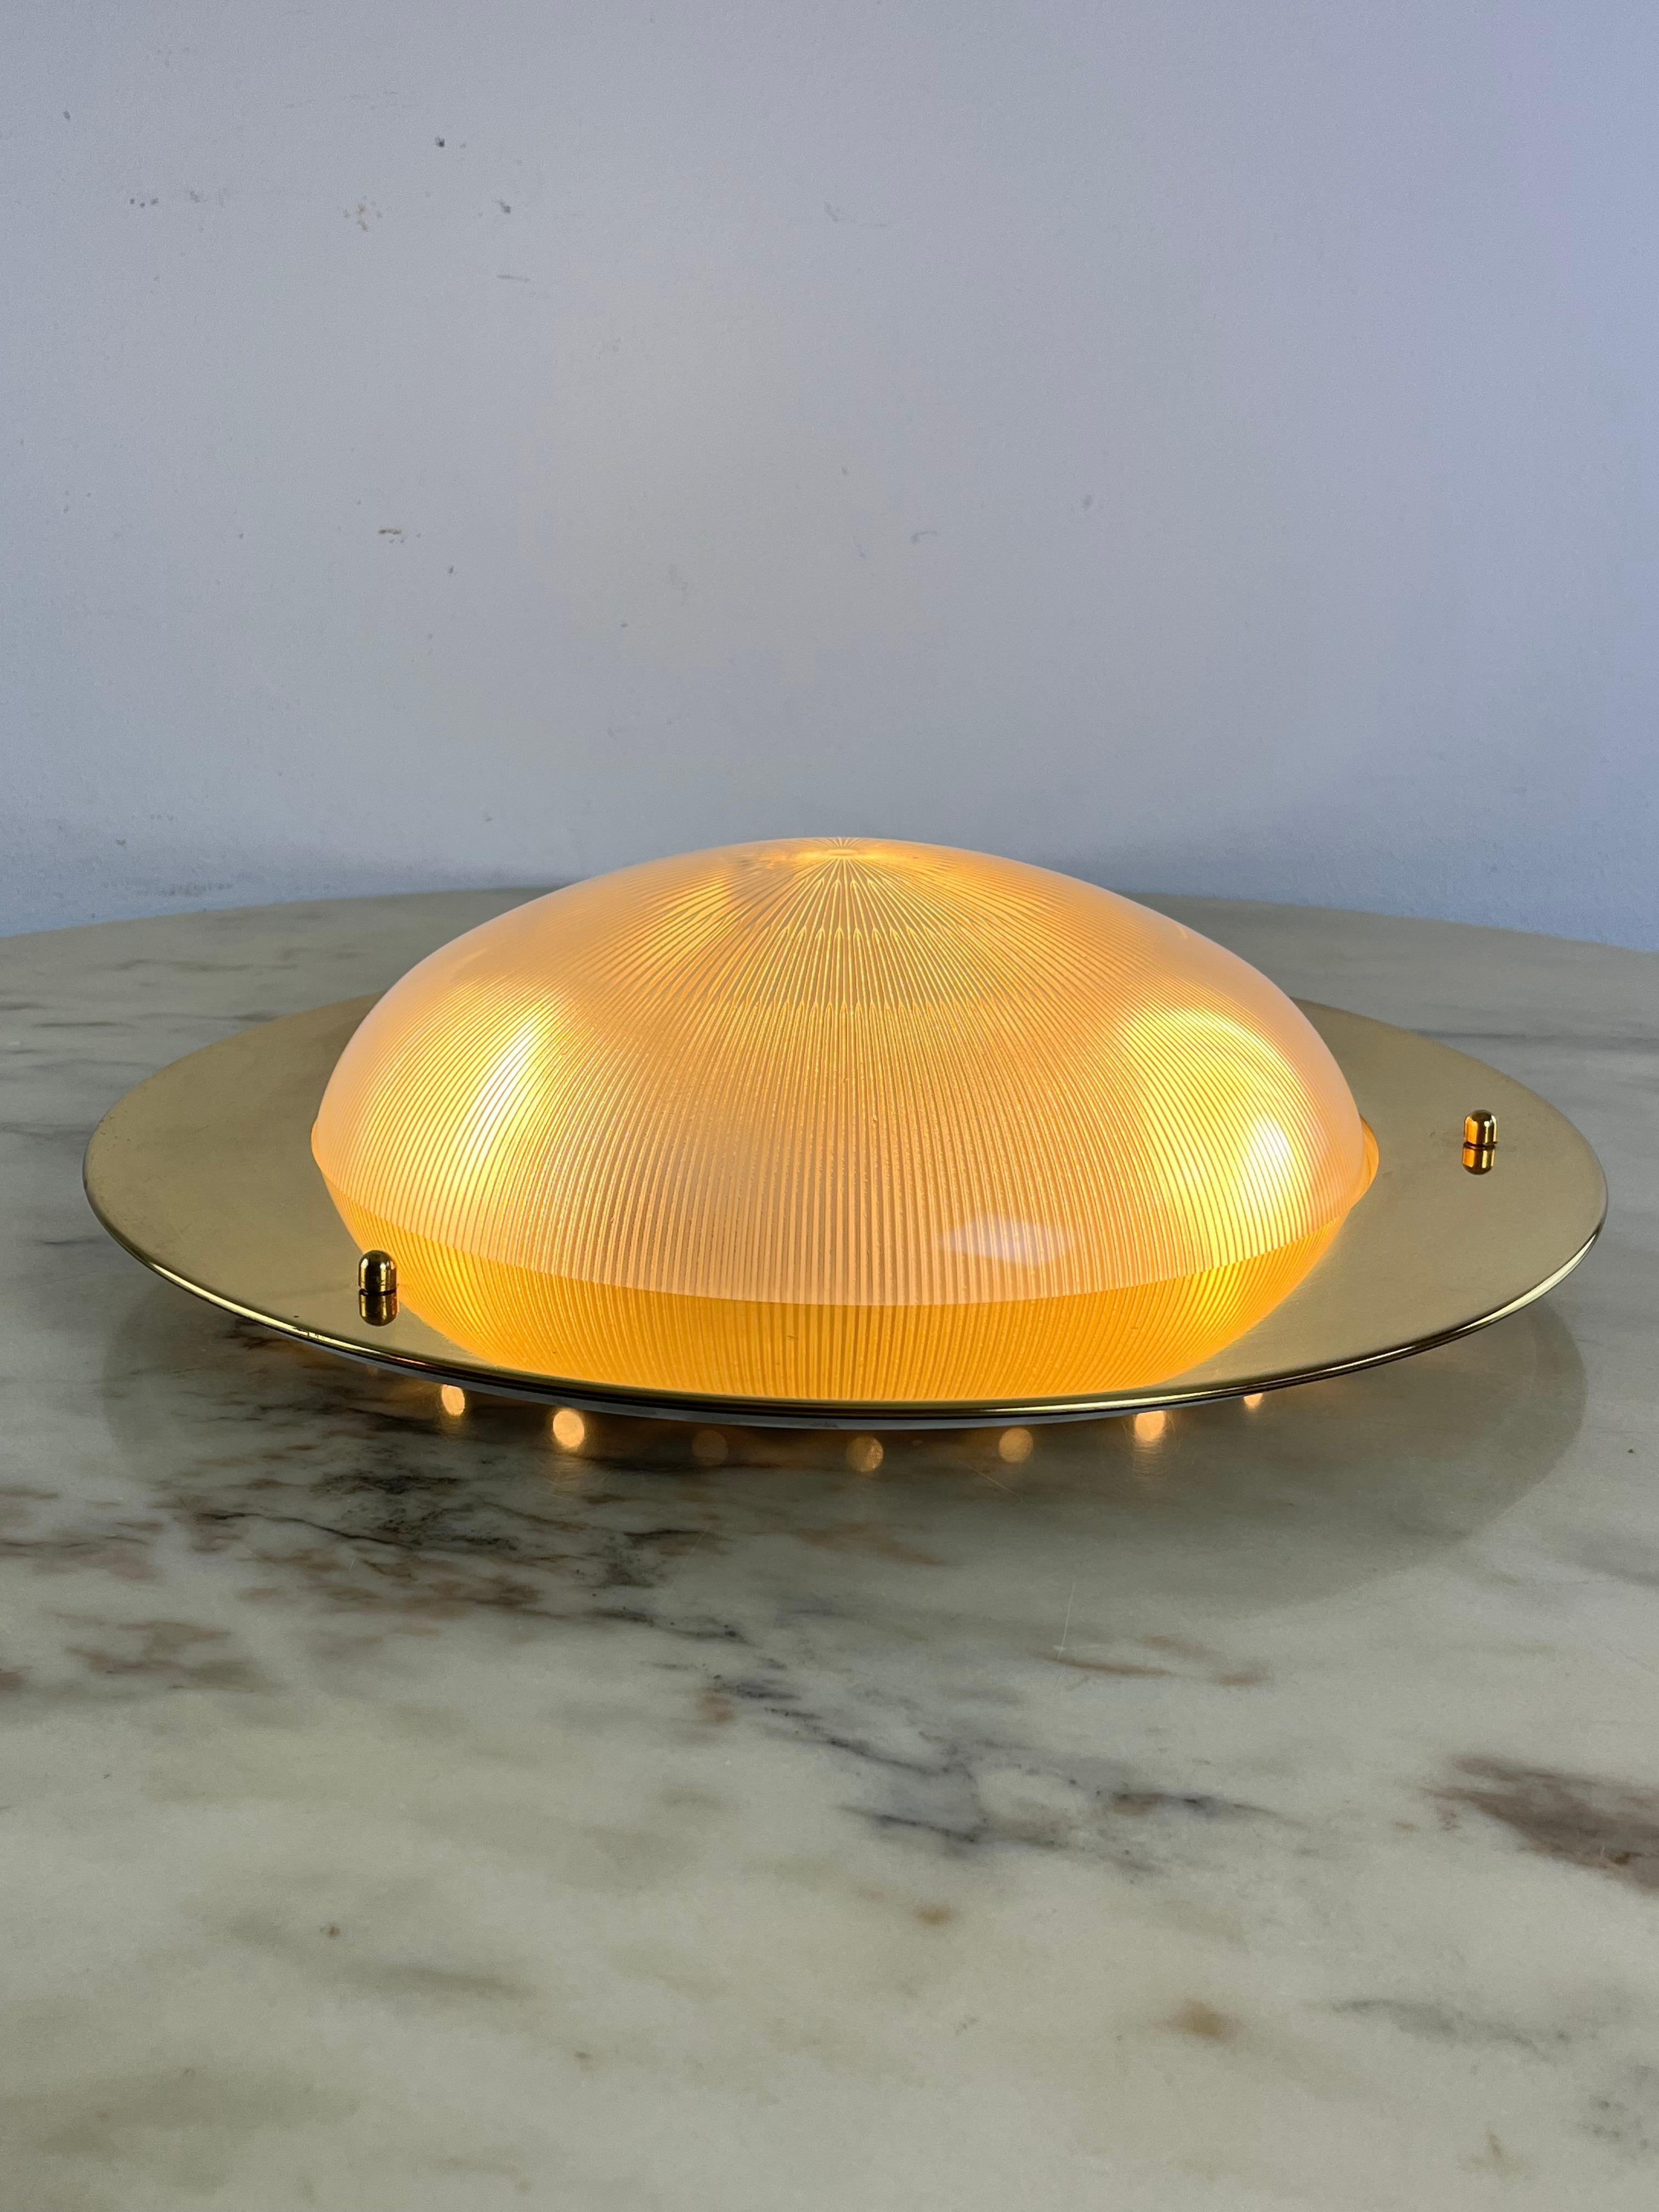 Mid-Century round ceiling light in the style of Luigi Caccia Dominioni 1960s
Three E27 lamps. Complete and in good condition.